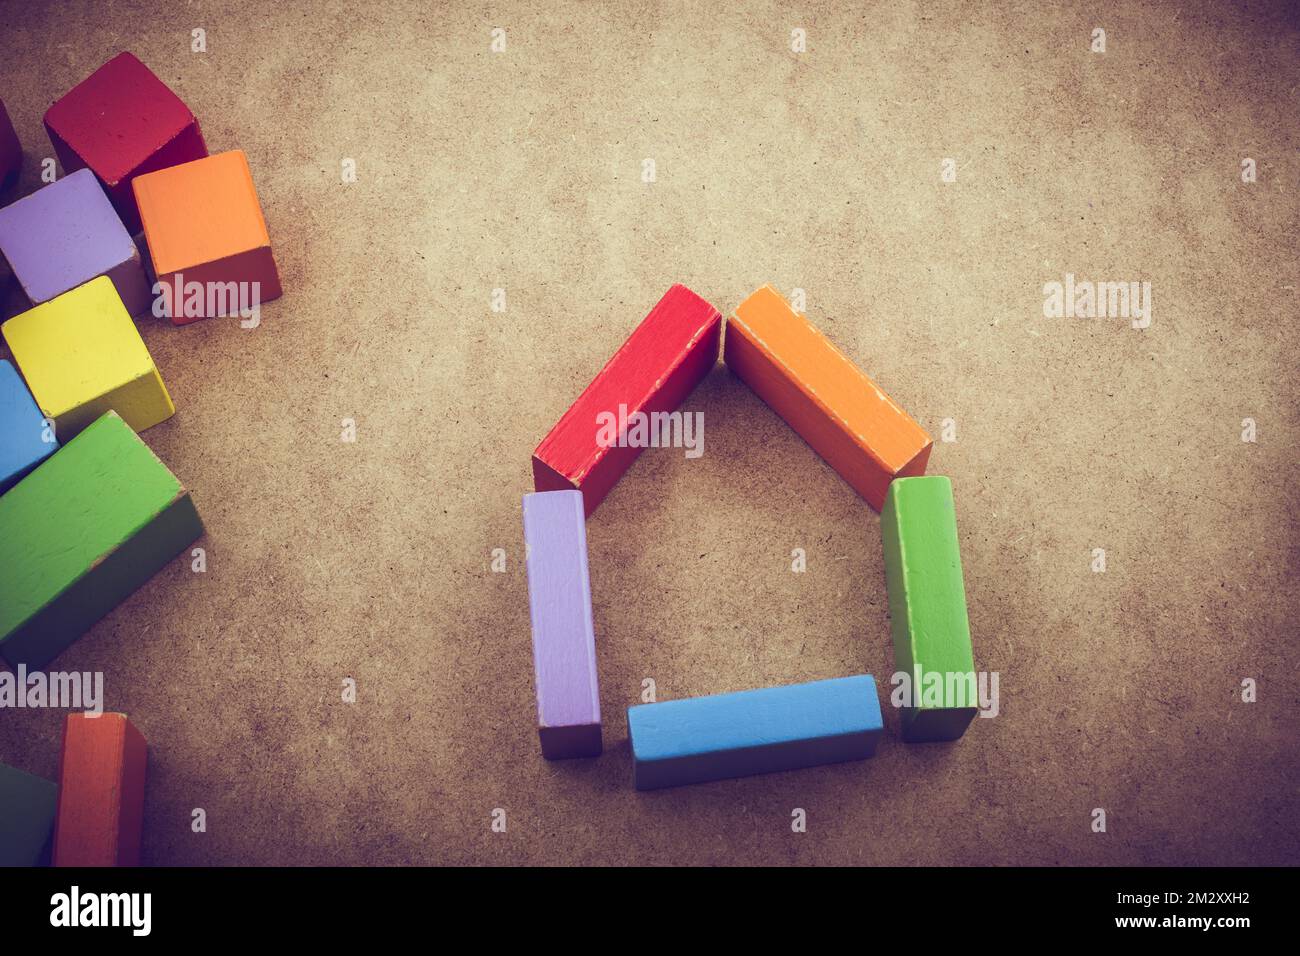 House shape formed out of building blocks on a brown background Stock Photo